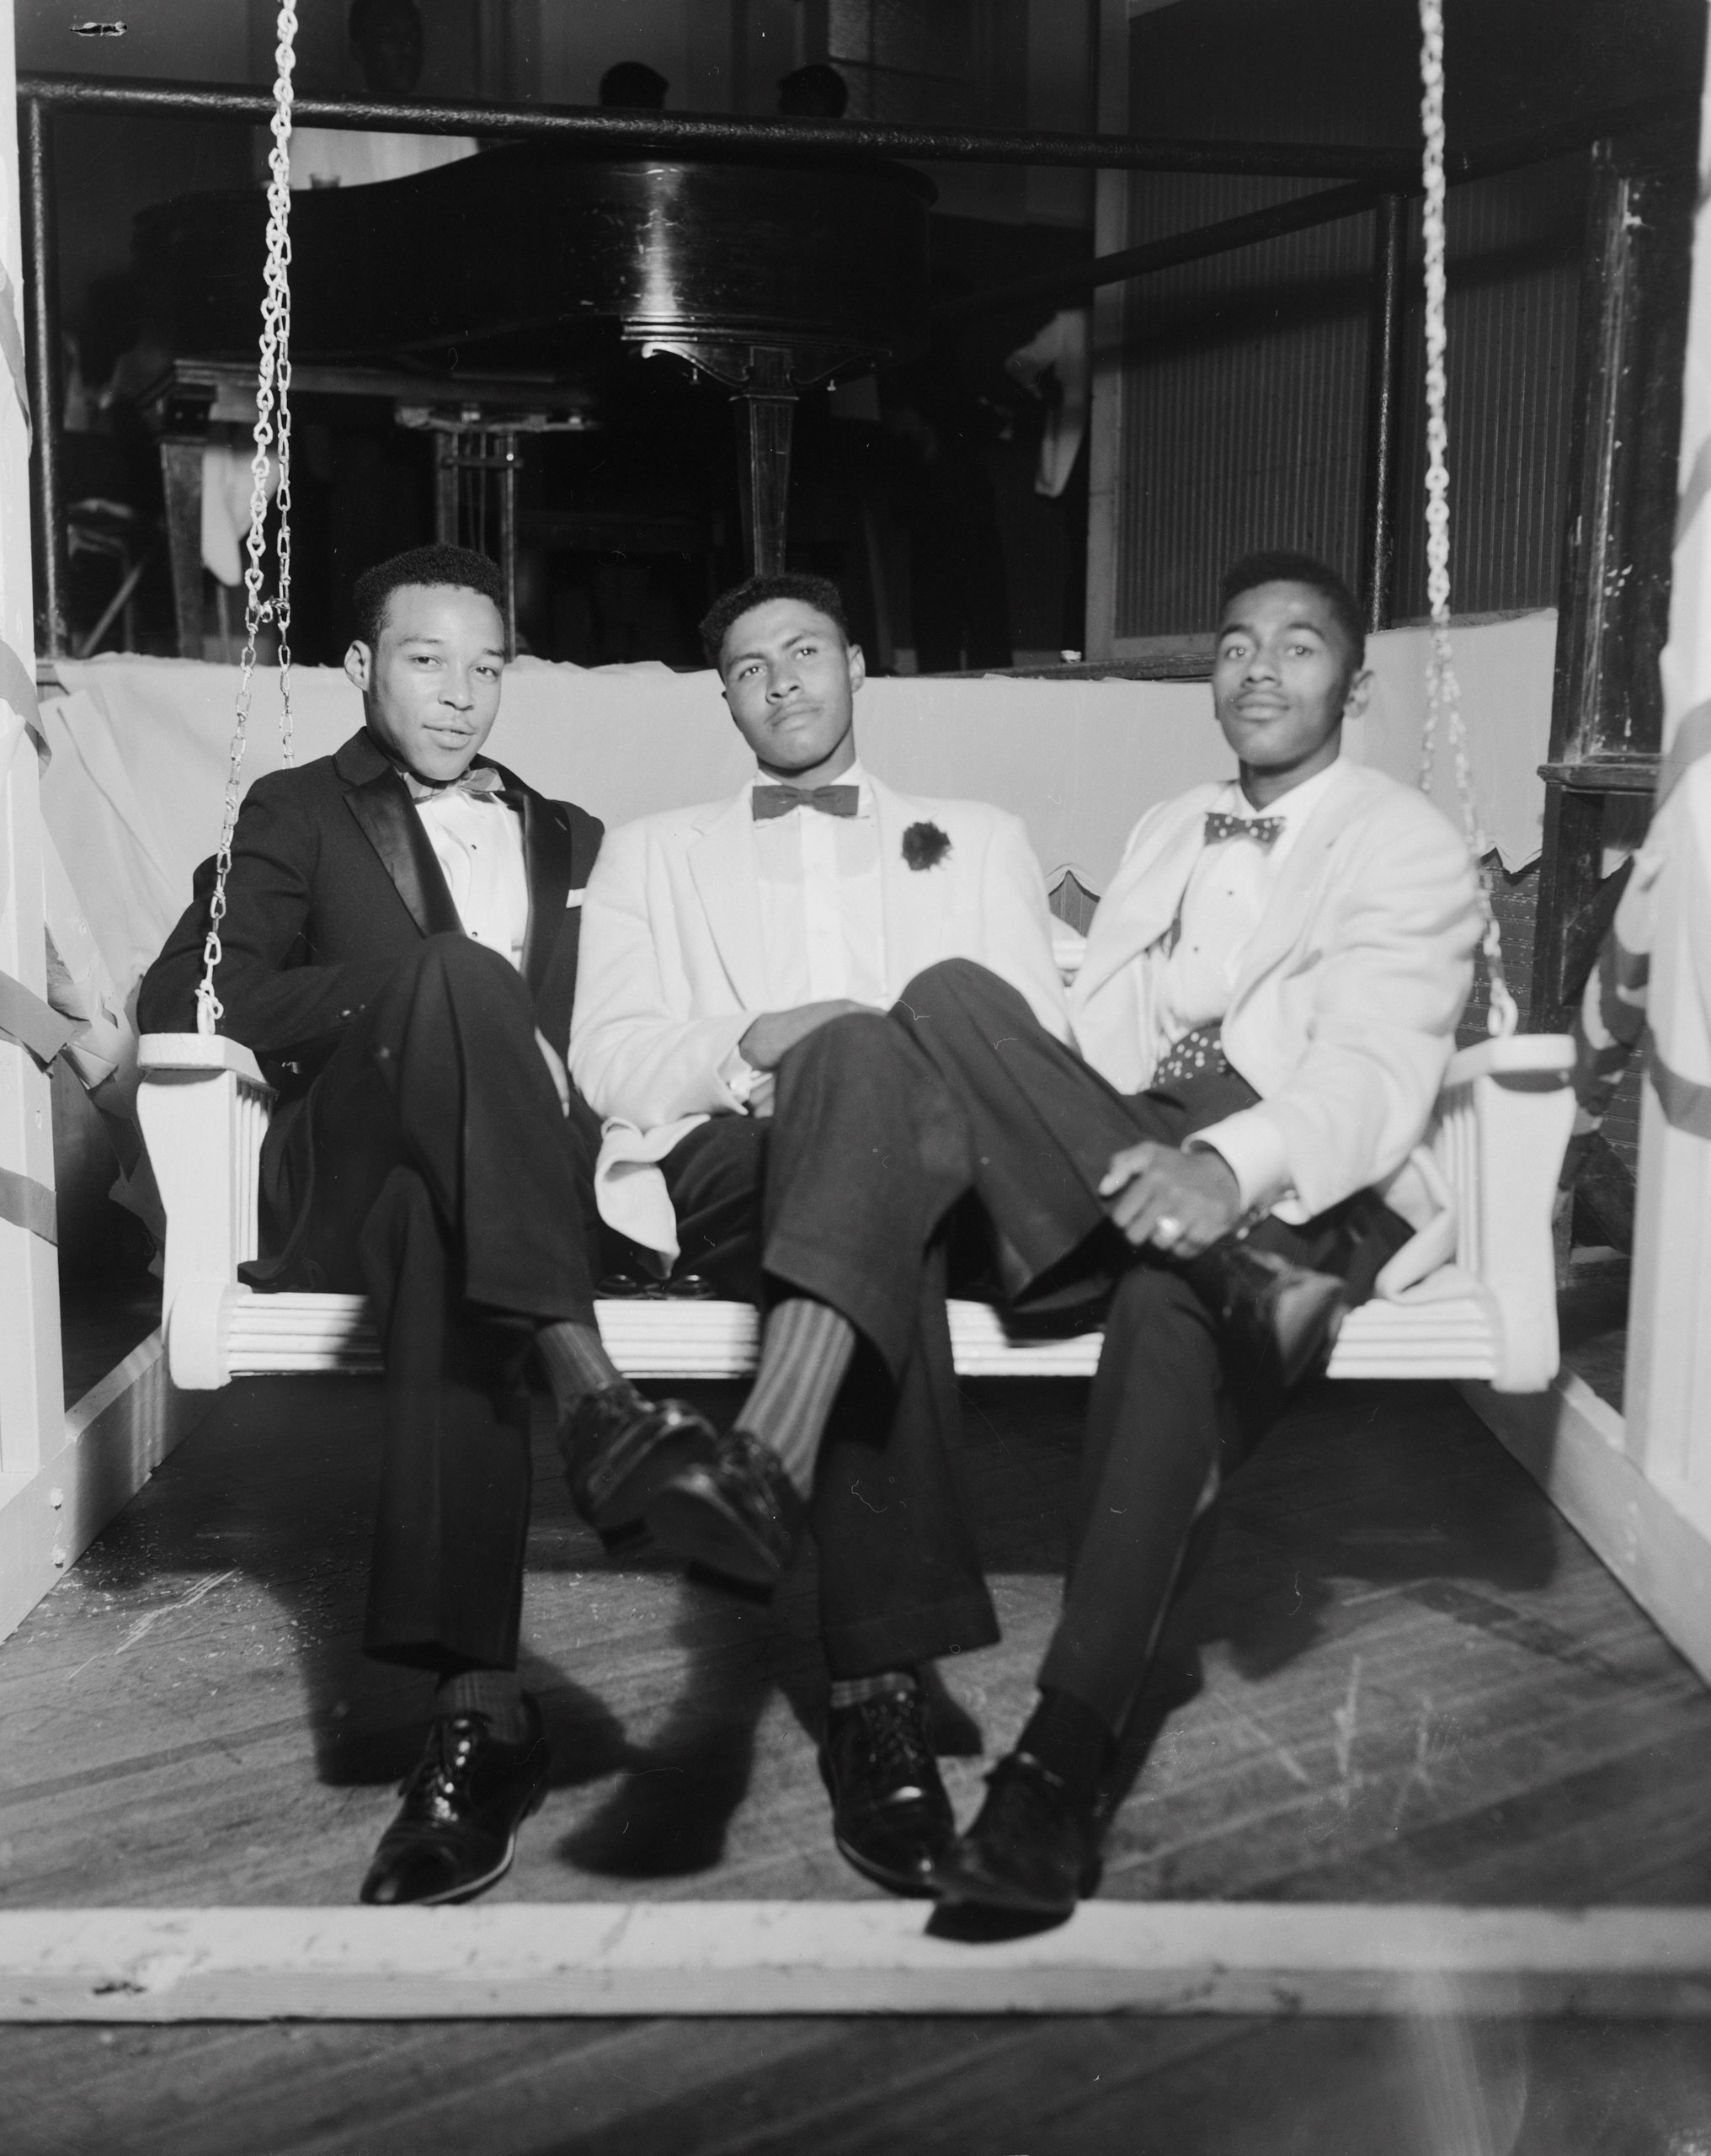 Douglas Burns, Charles Henry Sayles, and Alfred A. Neal sitting on a porch swing, 1958.